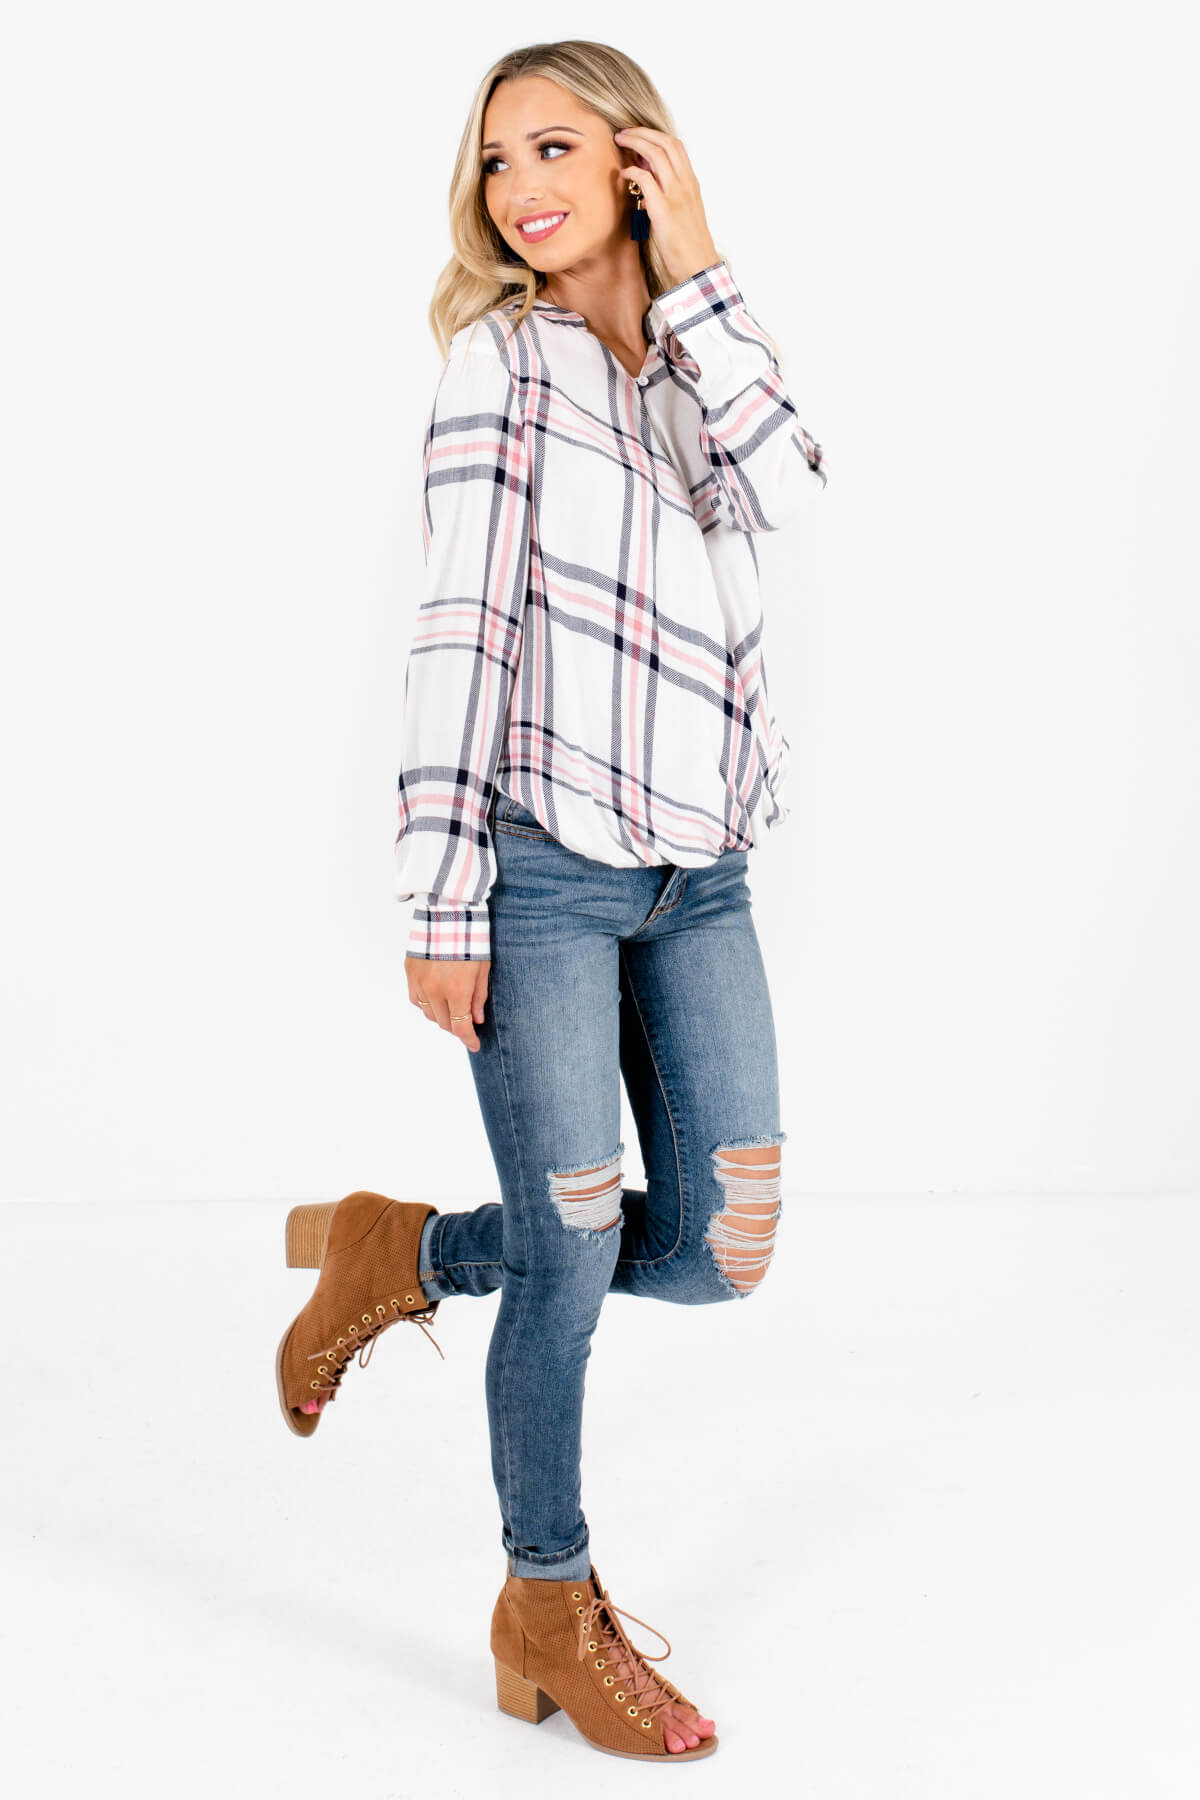 White Plaid Cute and Comfortable Boutique Tops for Women